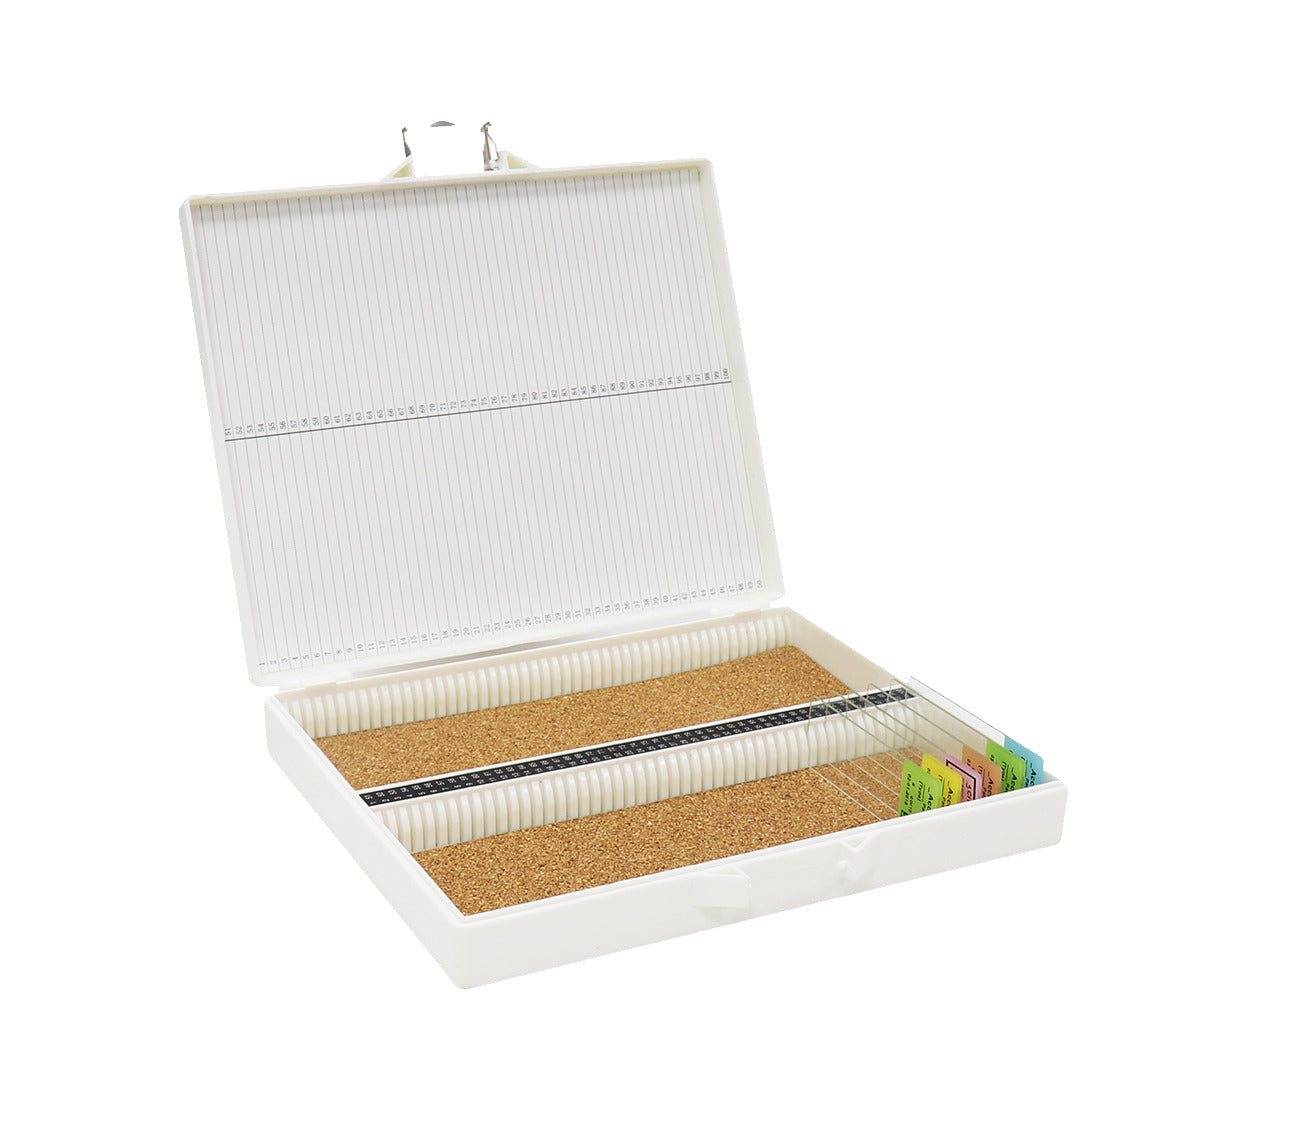 Slide Storage Boxes for 100 Pieces of 25.0x75.0mm (1"x3") Slides, with Steel Lock, Grey Color, ABS Material. With Cork Steel on the Bottom and Index List Inside the Lid